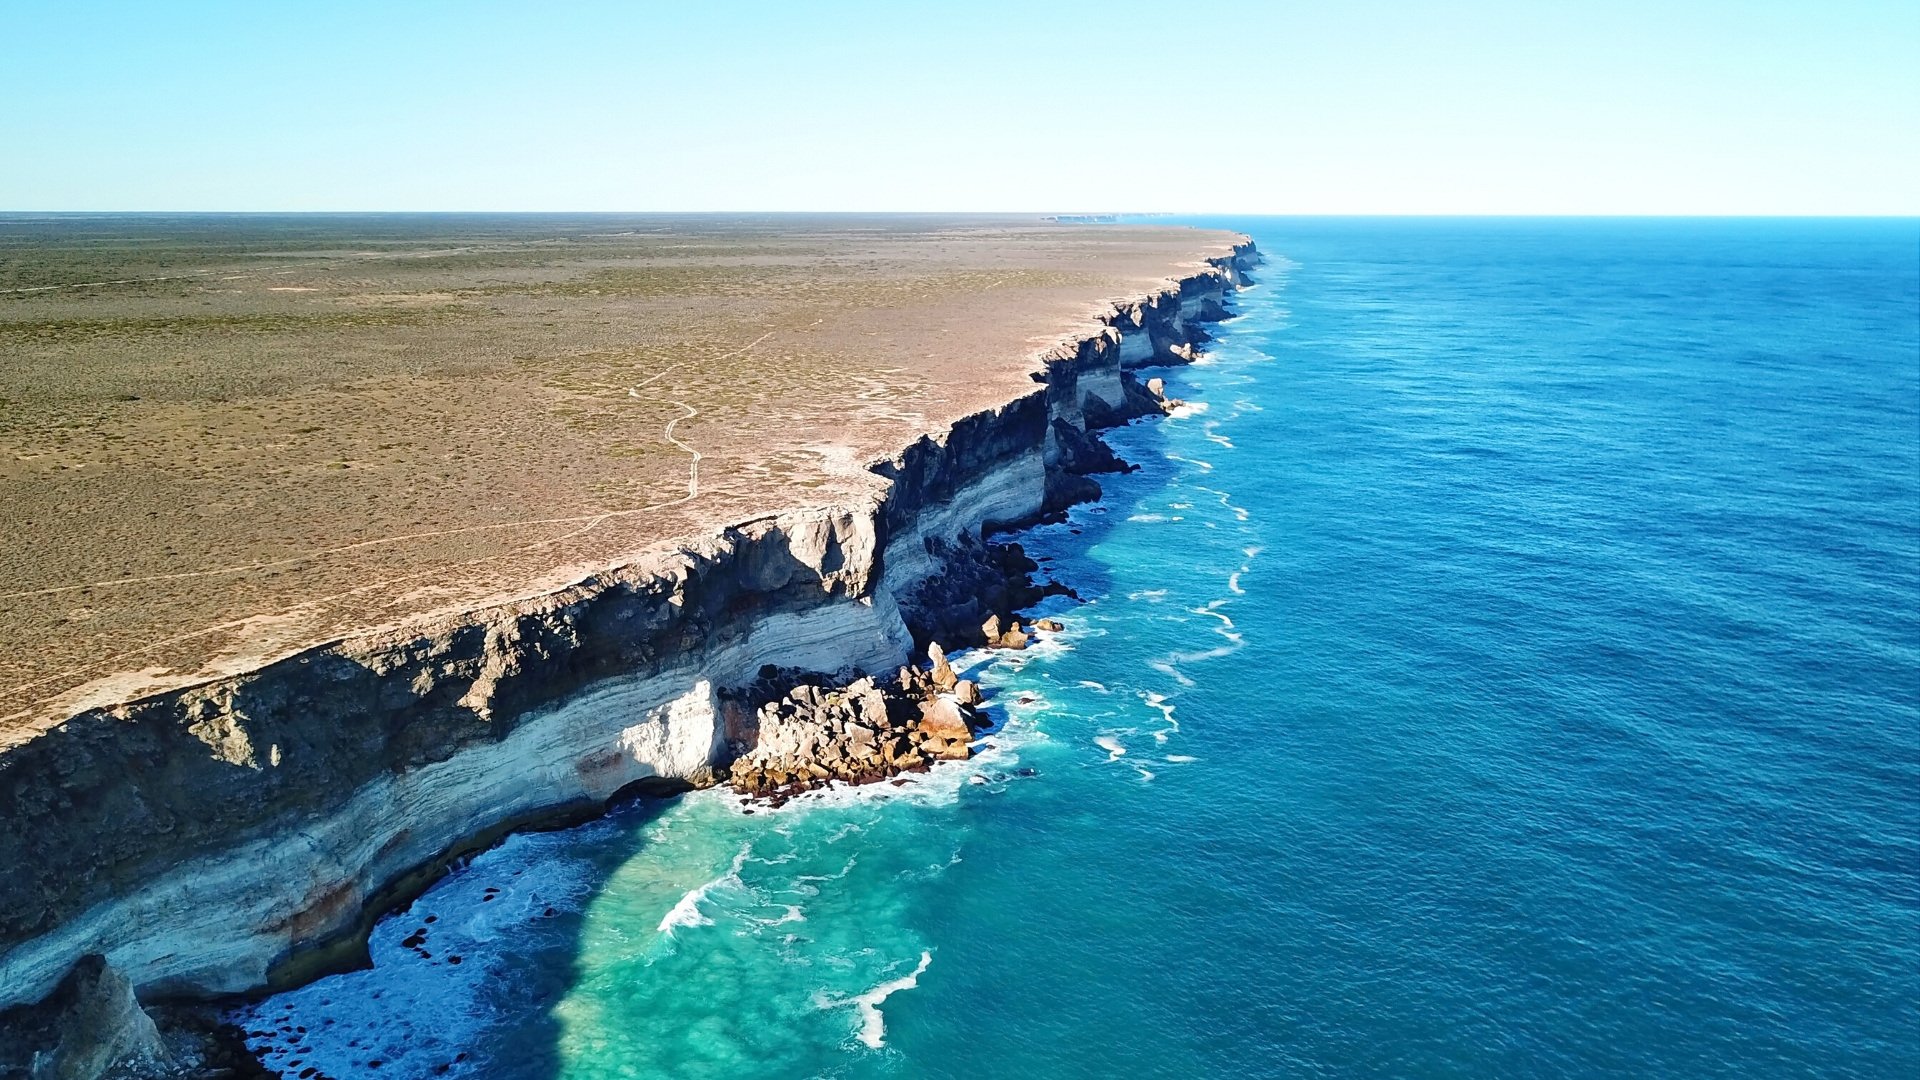 World Heritage protection for the Nullarbor & Great Australian Bight